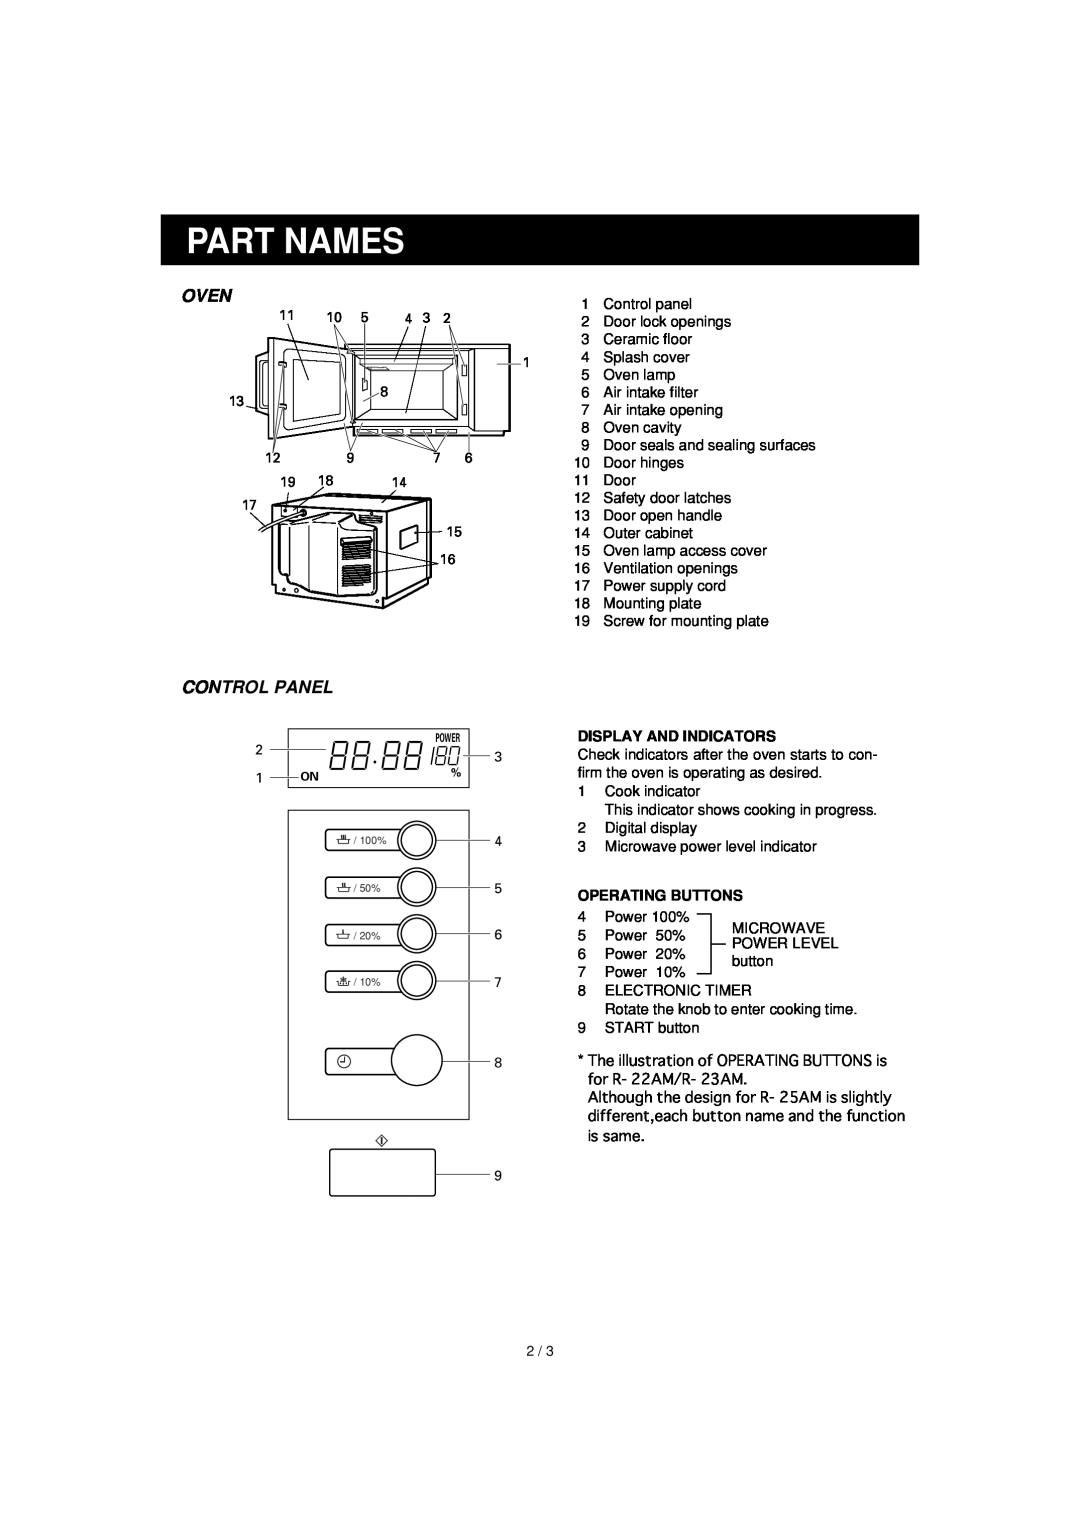 Sharp R-25AM, R-23AM, R-22AM operation manual Part Names, Display And Indicators, Operating Buttons, Oven, Control Panel 